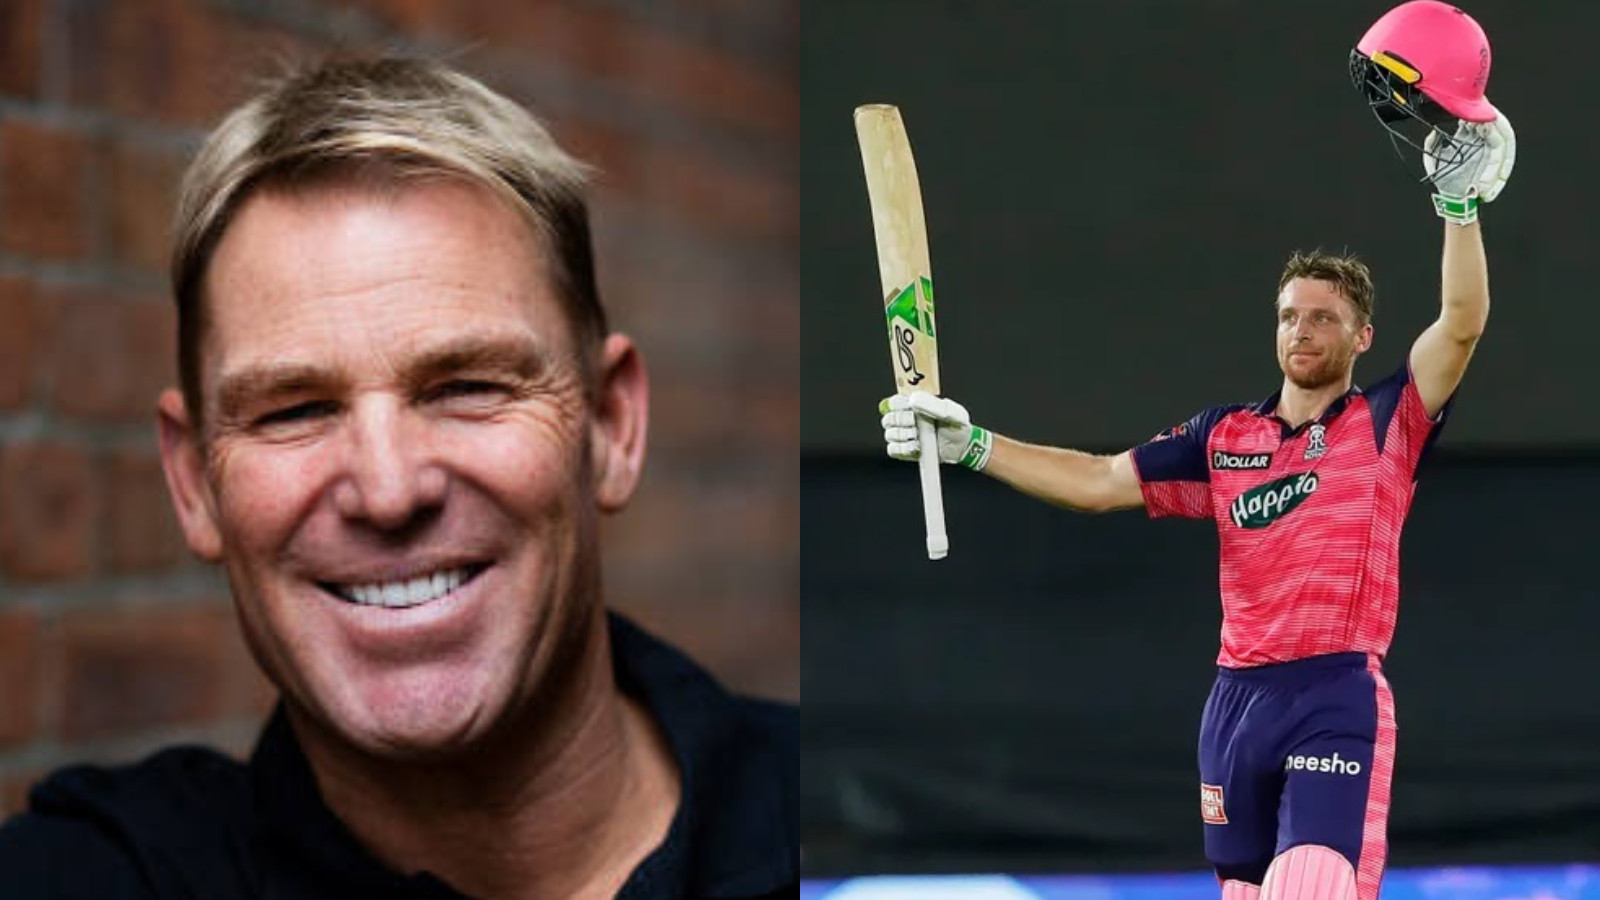 IPL 2022: 'We know he is looking down on us' - Jos Buttler's heartfelt words for Shane Warne